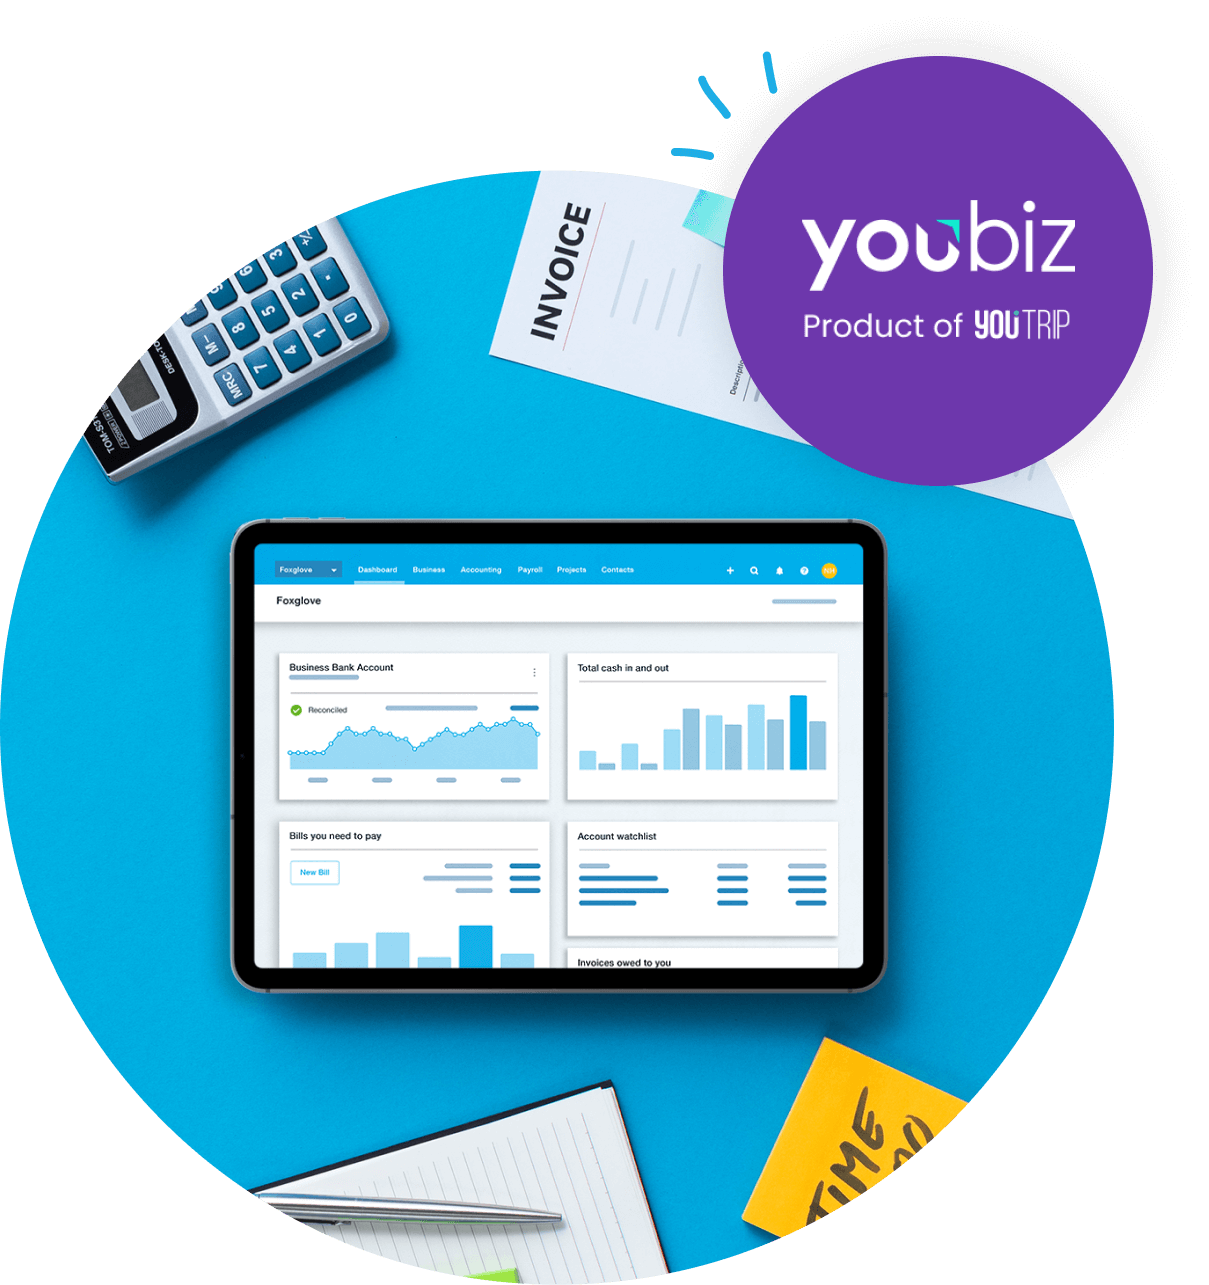 Key financial data displays in charts and tables on the Xero dashboard.